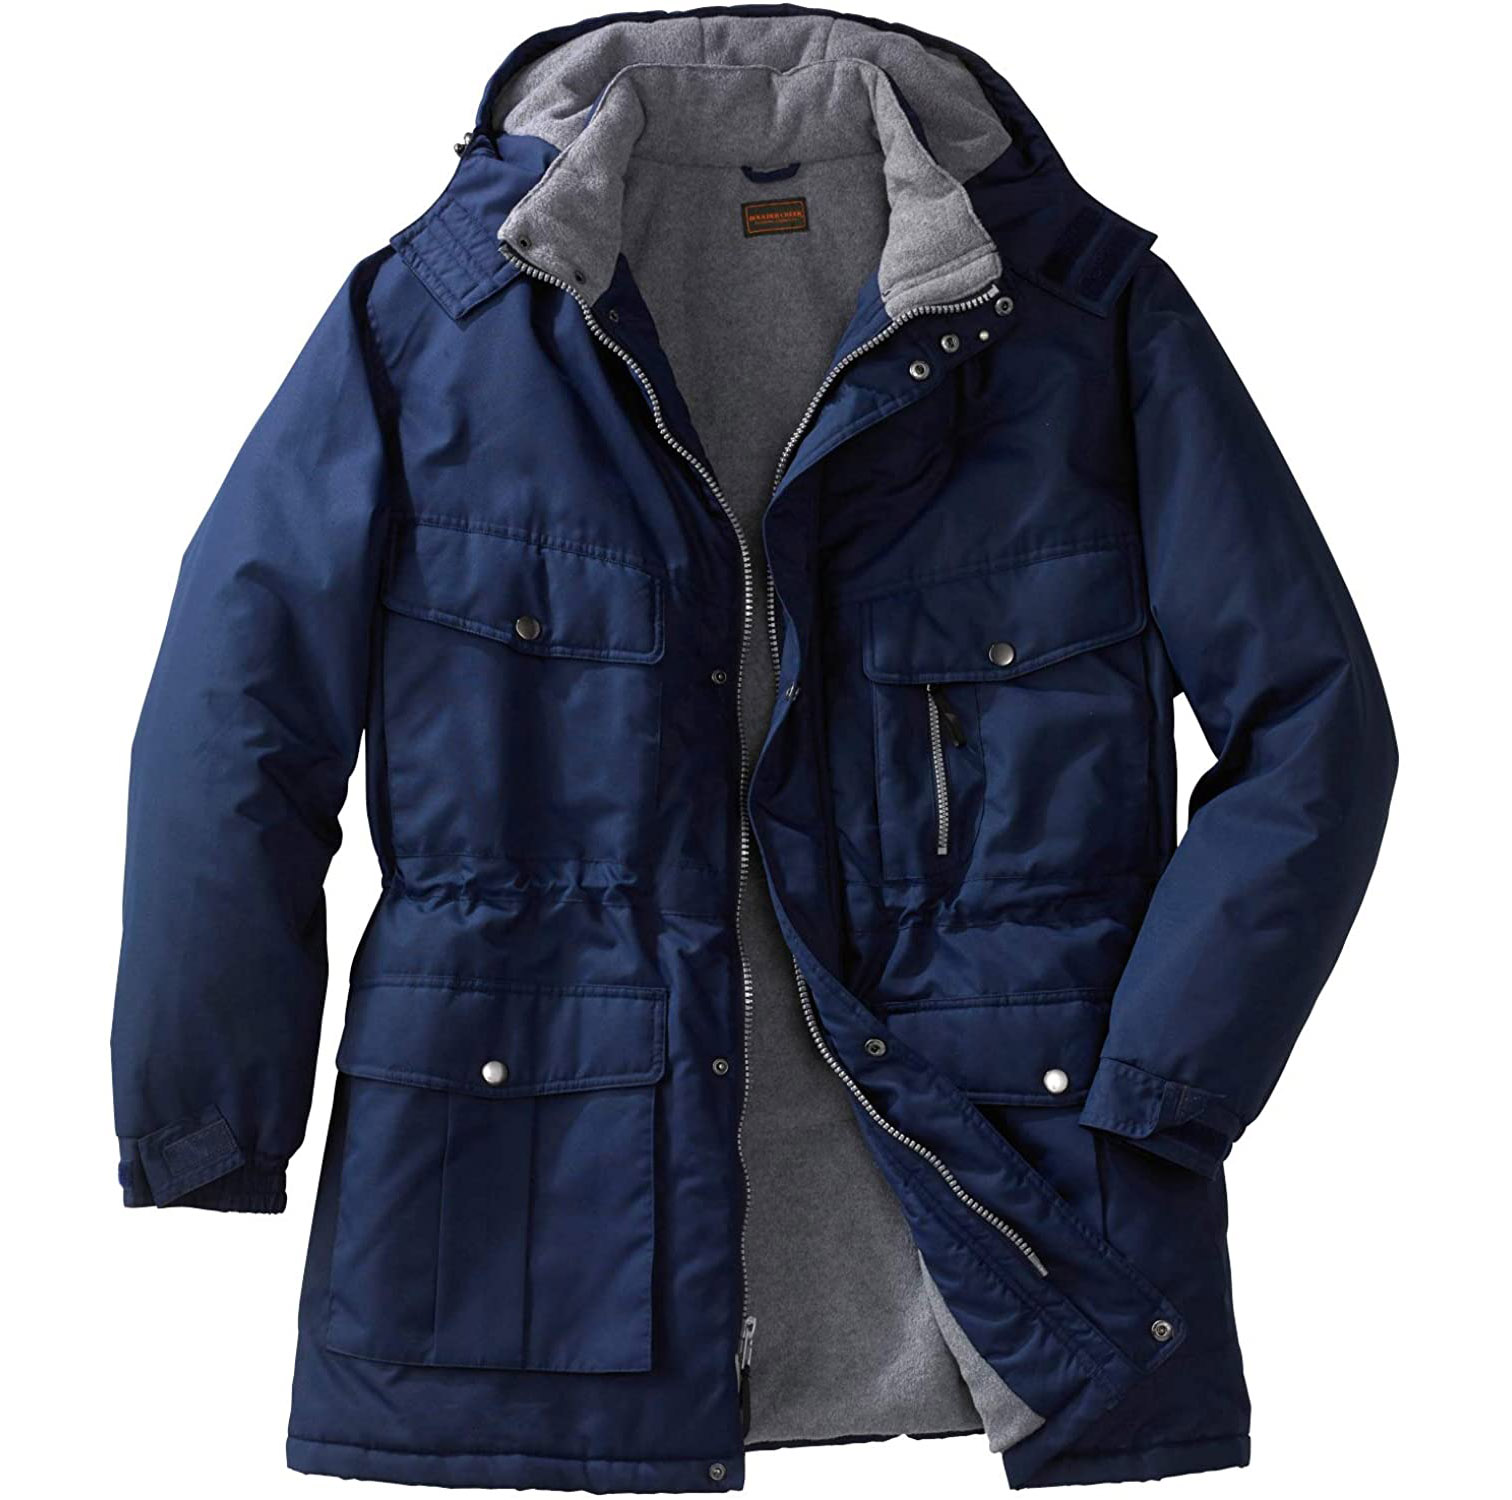 Stay Warm In The Icy Cold With One Of These 12 Best Winter Parkas For